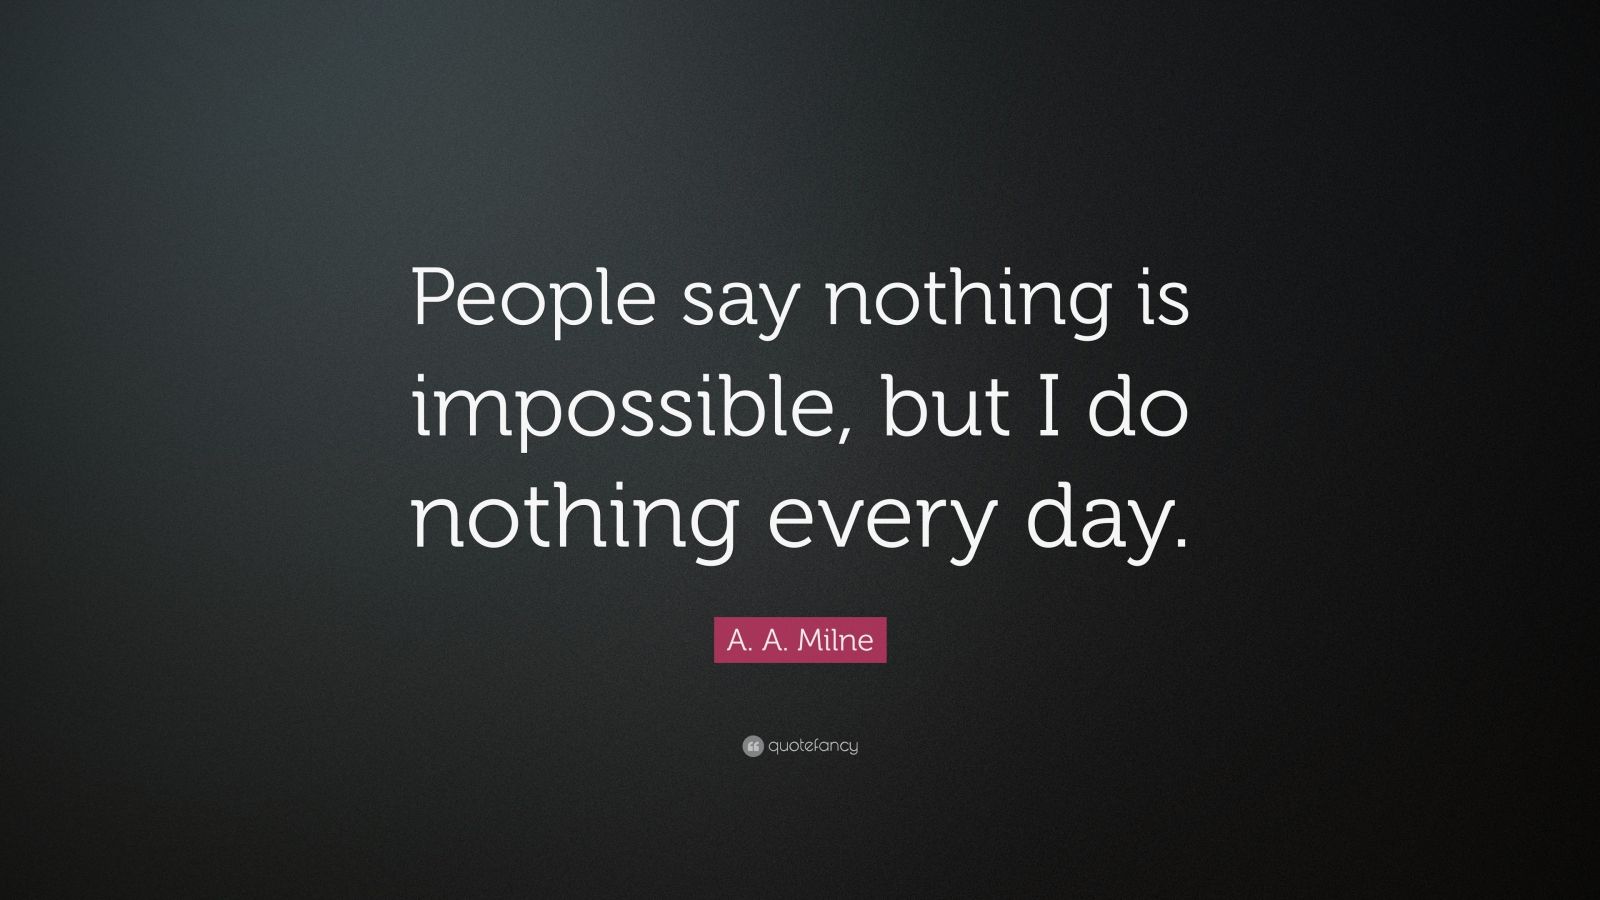 A. A. Milne Quote: “People say nothing is impossible, but I do nothing ...